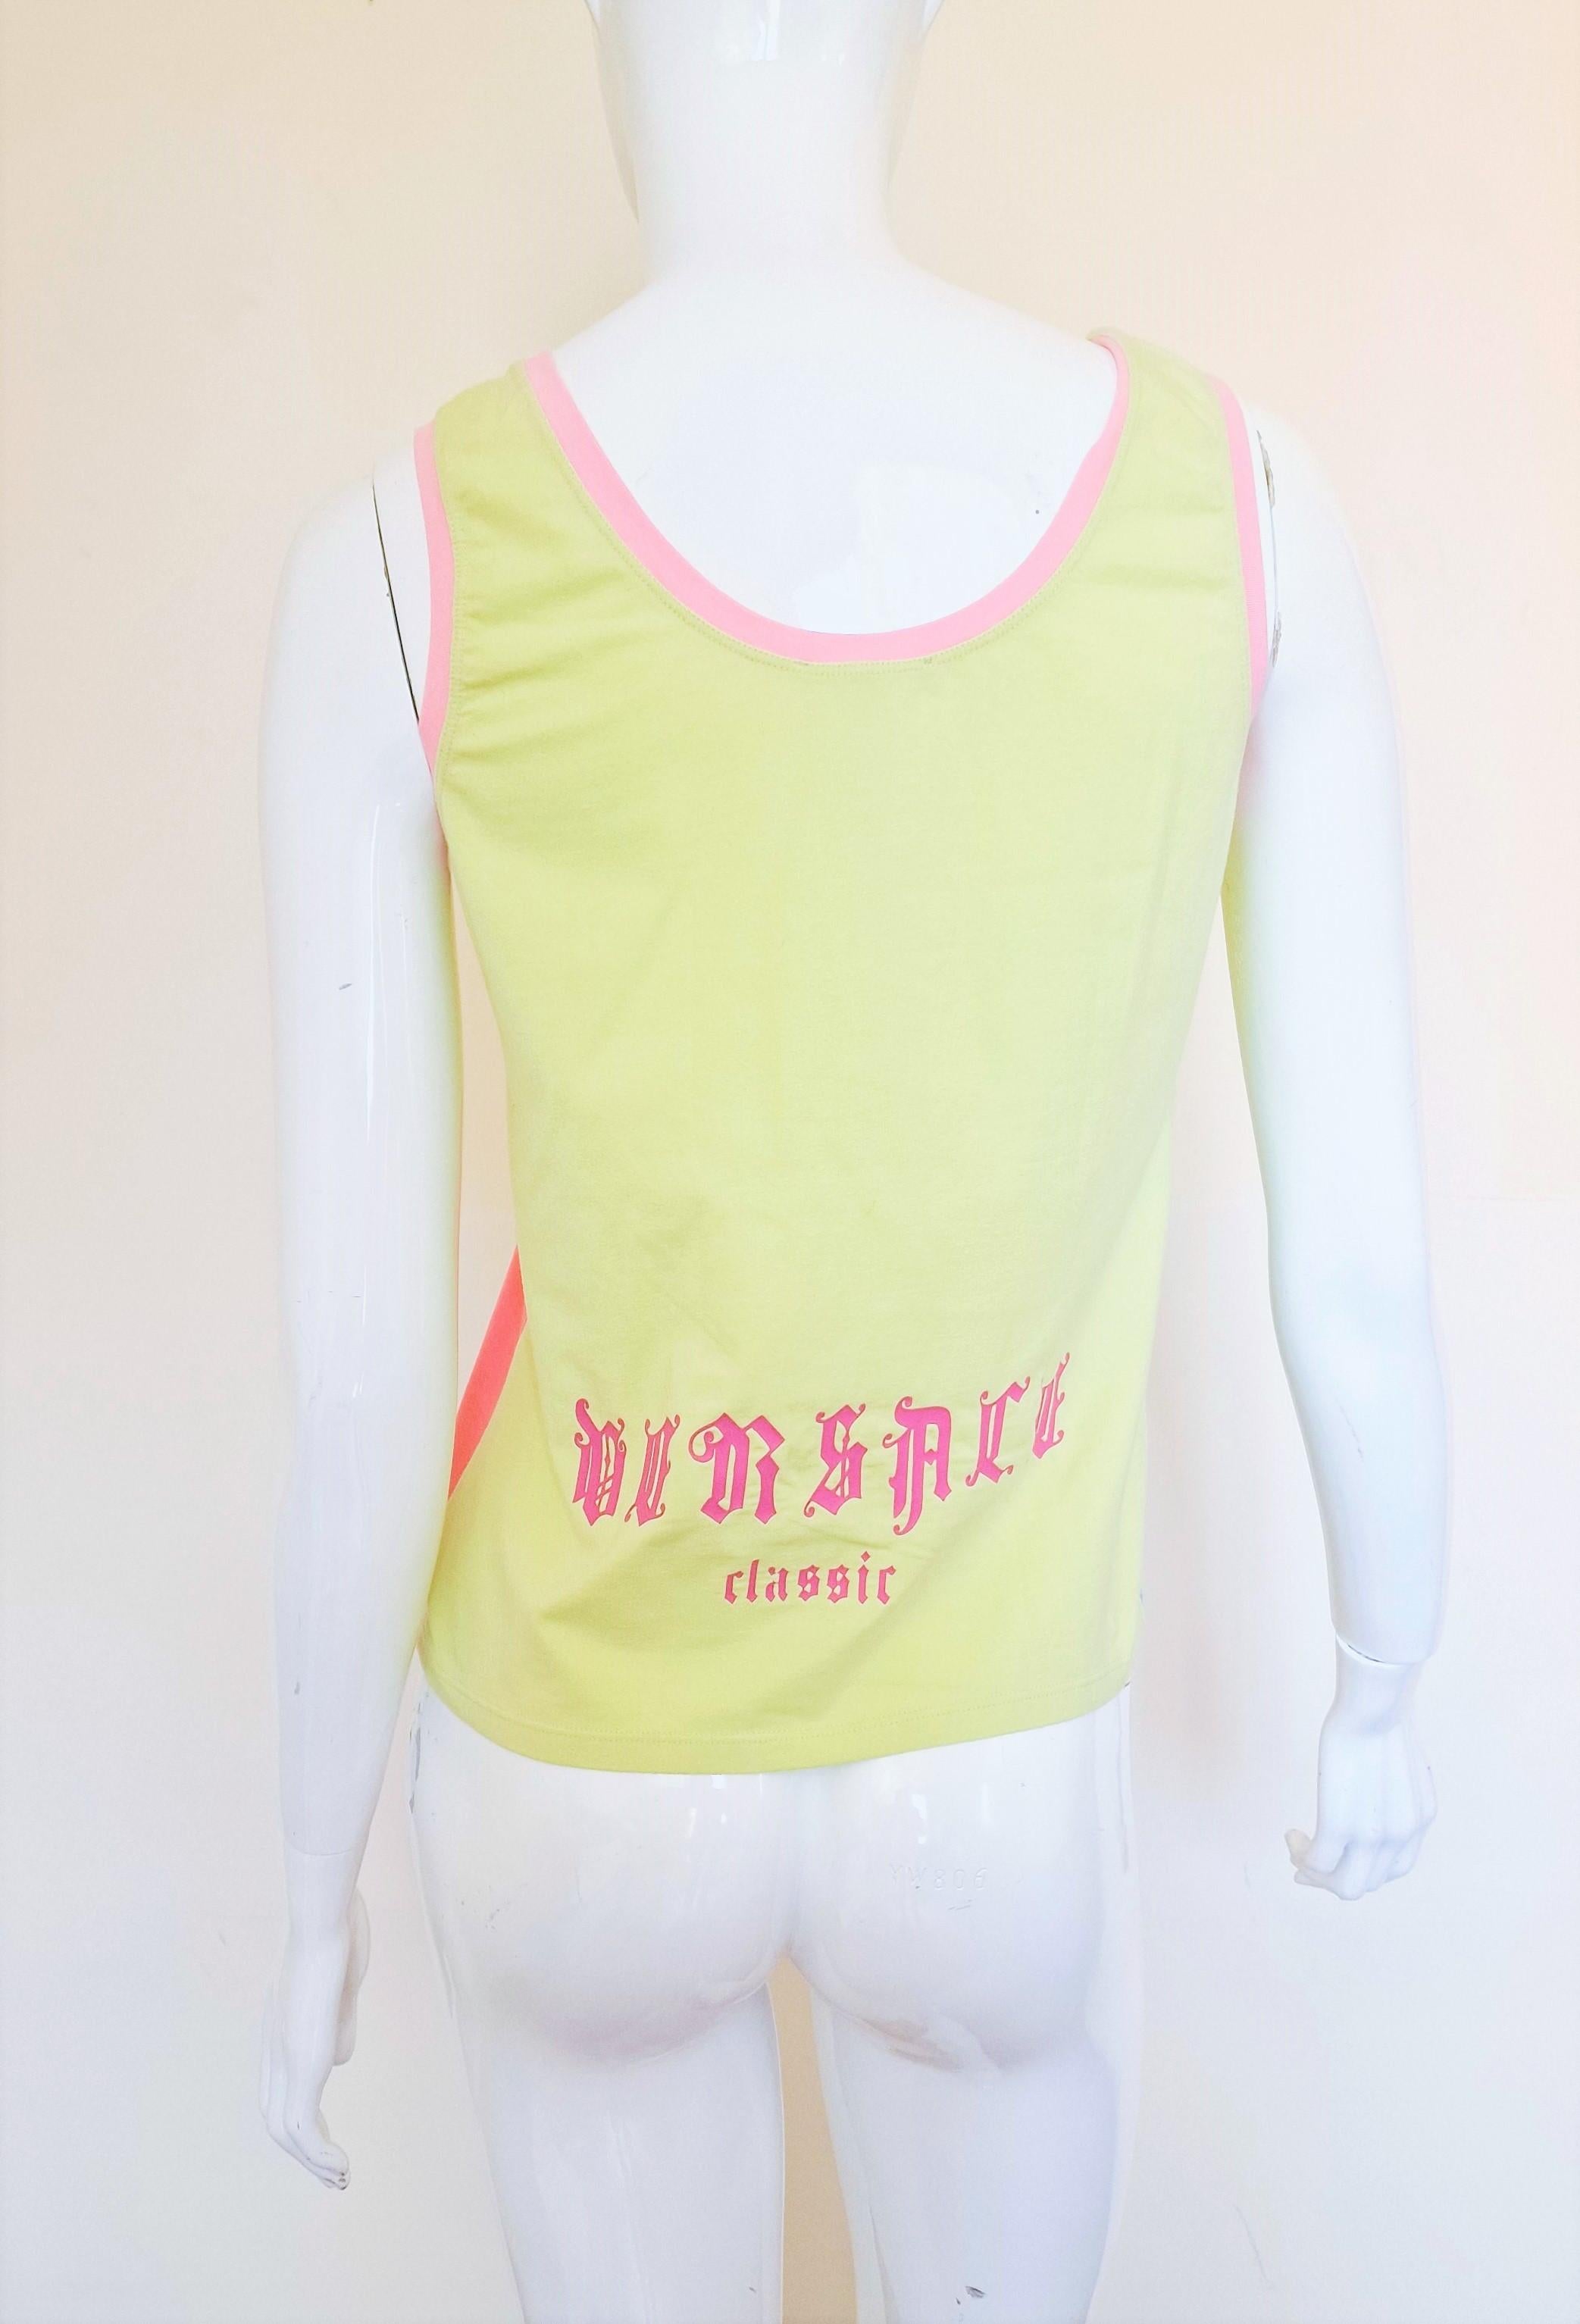 Gianni Versace Donatella Lollipop 2004 Pink Up Girl Color Block T-shirt Tee Top  In Excellent Condition For Sale In PARIS, FR